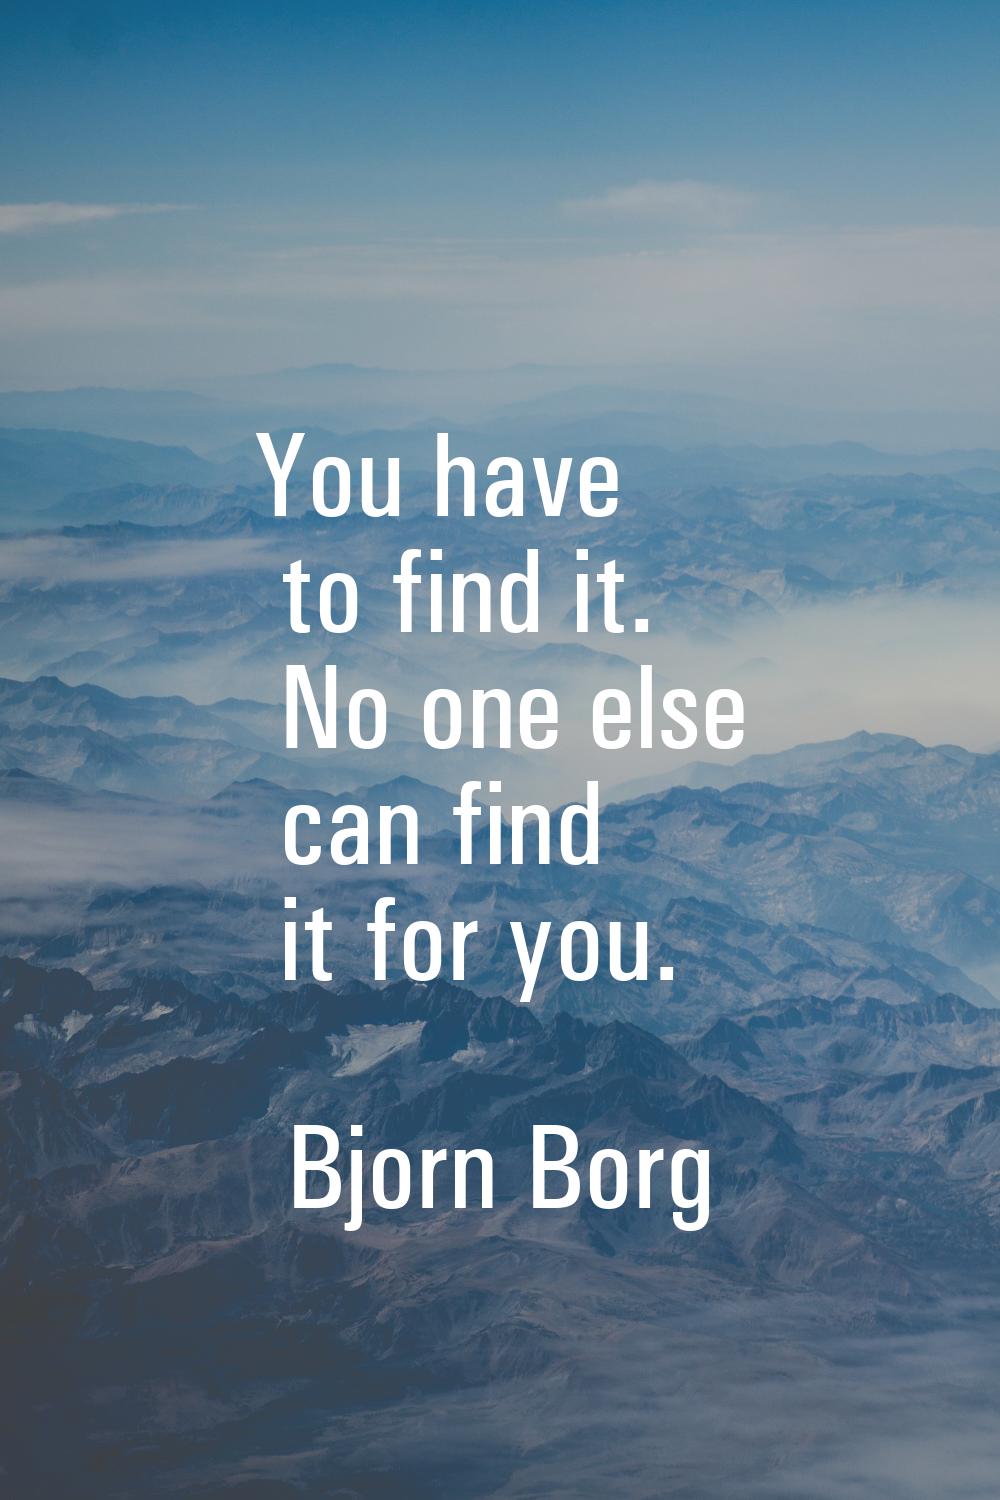 You have to find it. No one else can find it for you.